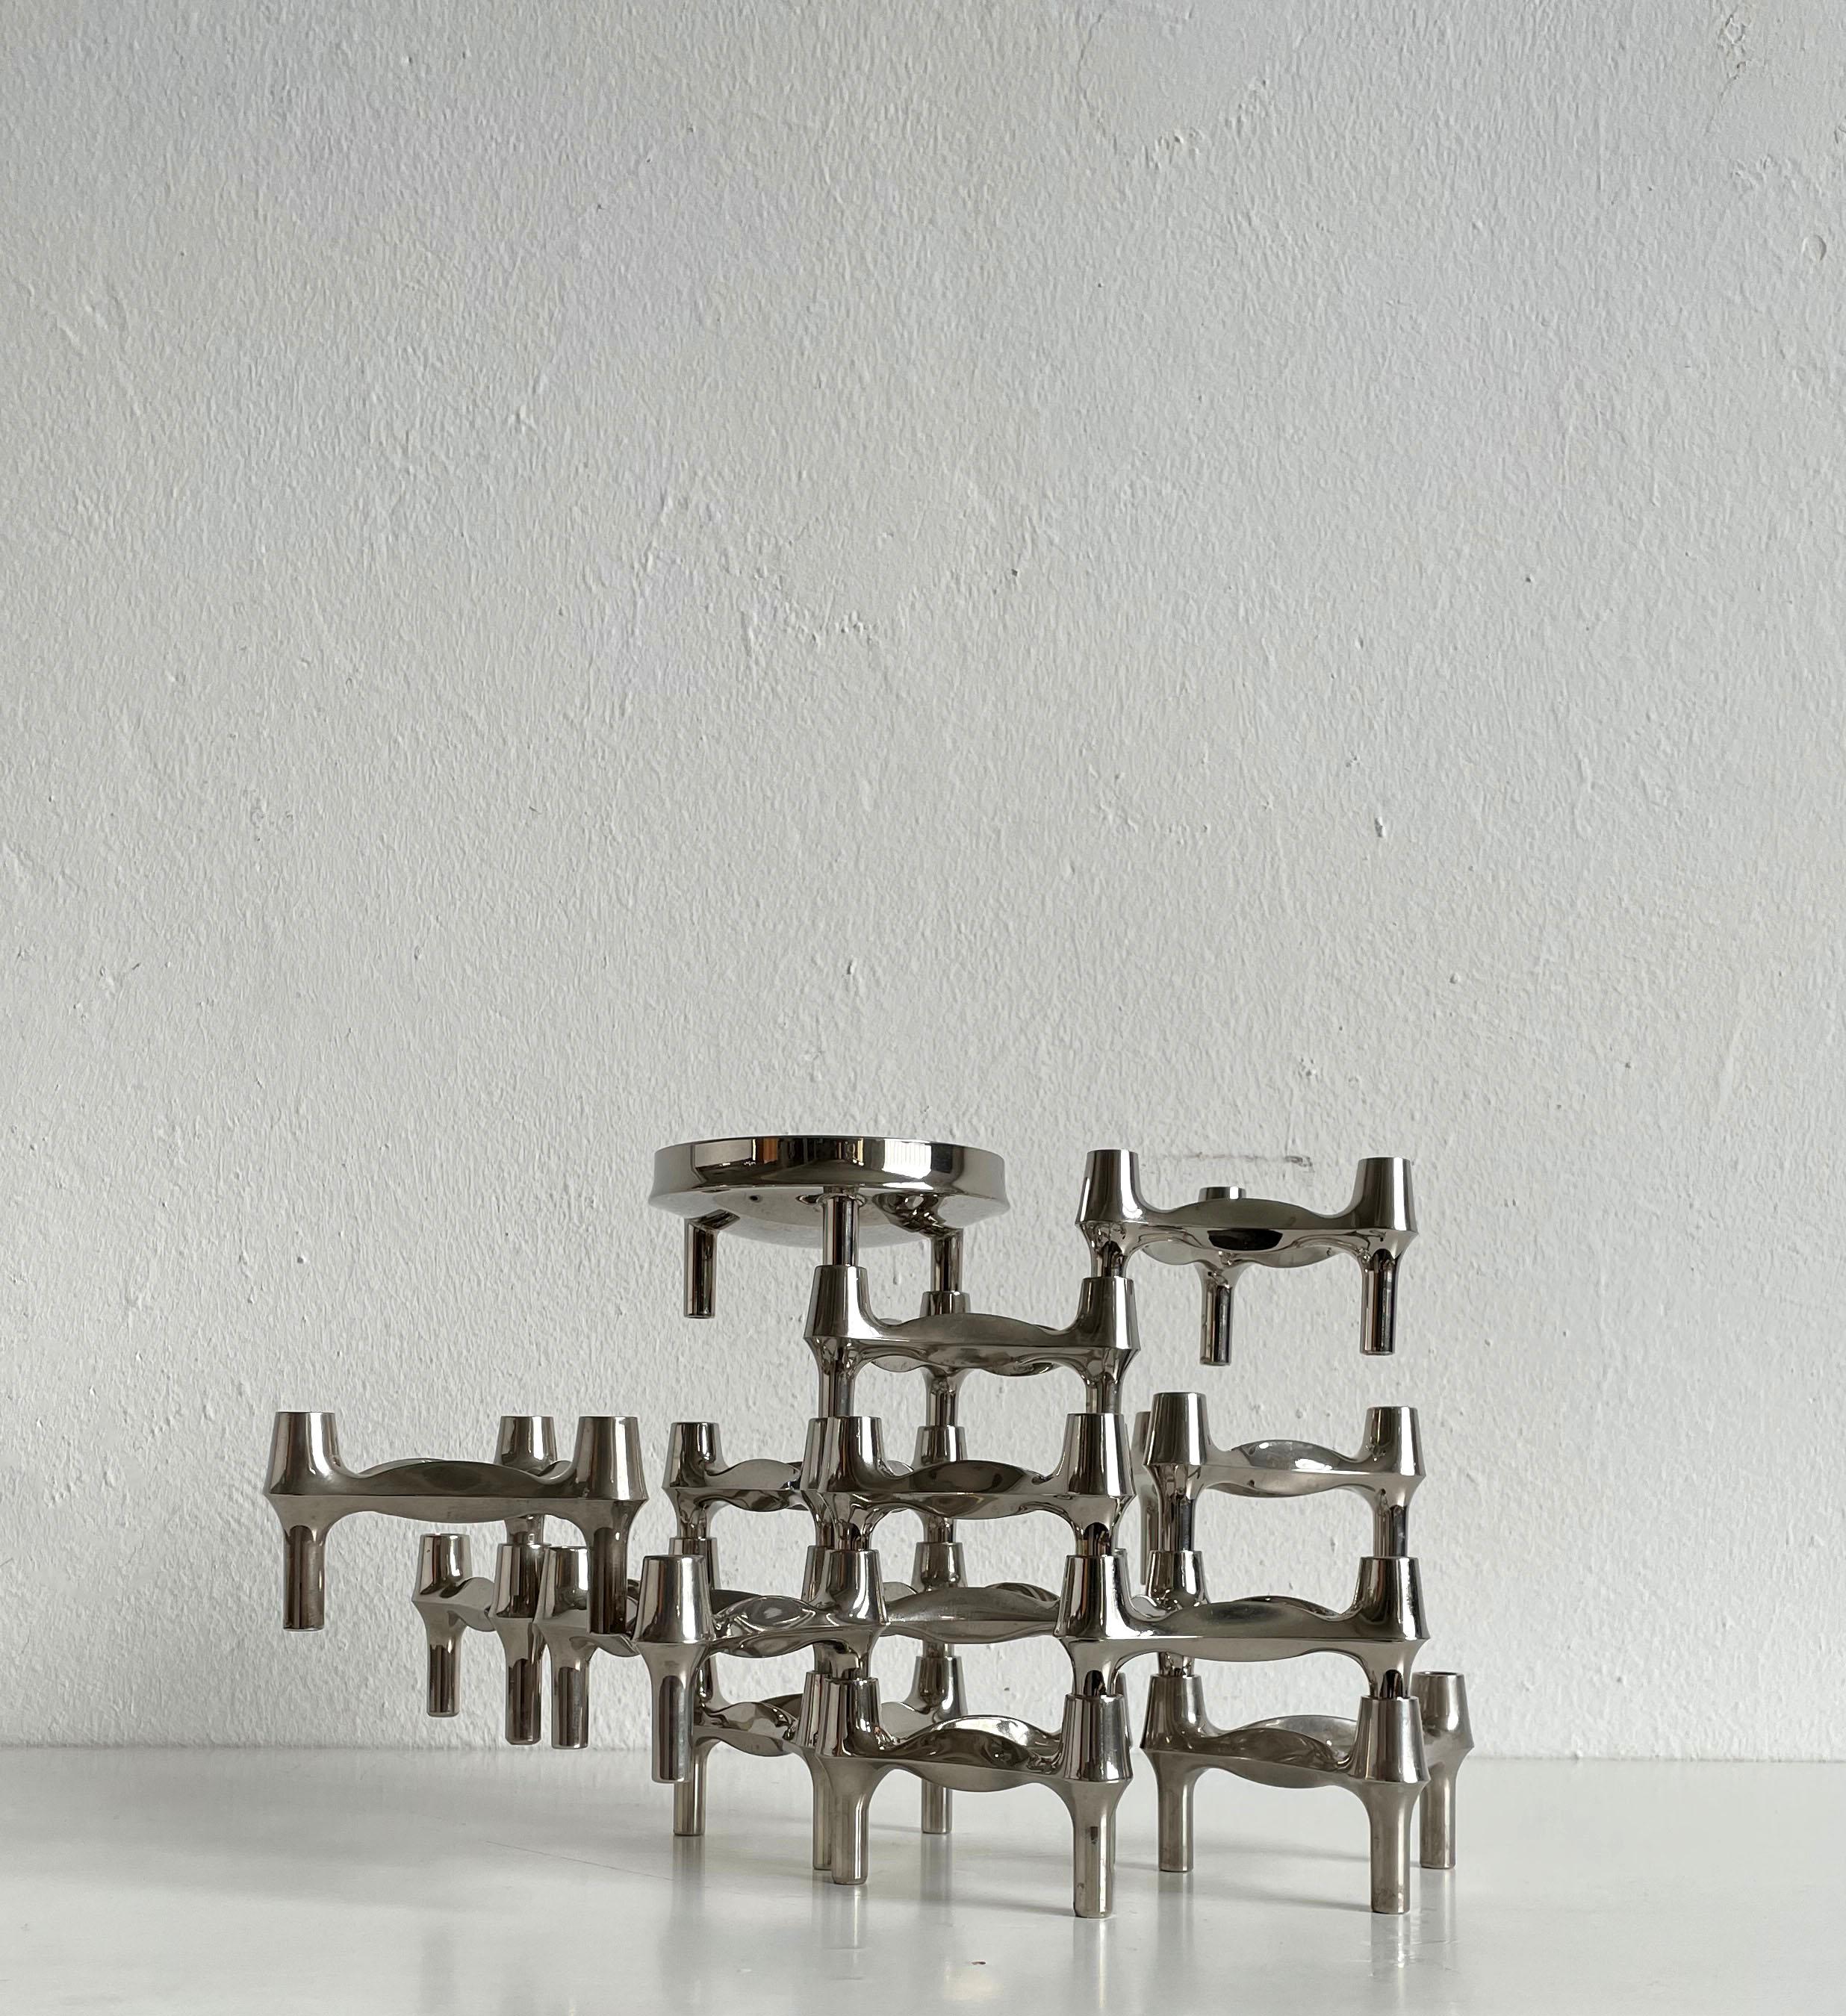 Modular Candle Holder by Caesare Stoffi for BMF Nagel, 14 Pcs, Germany, 1970s 2